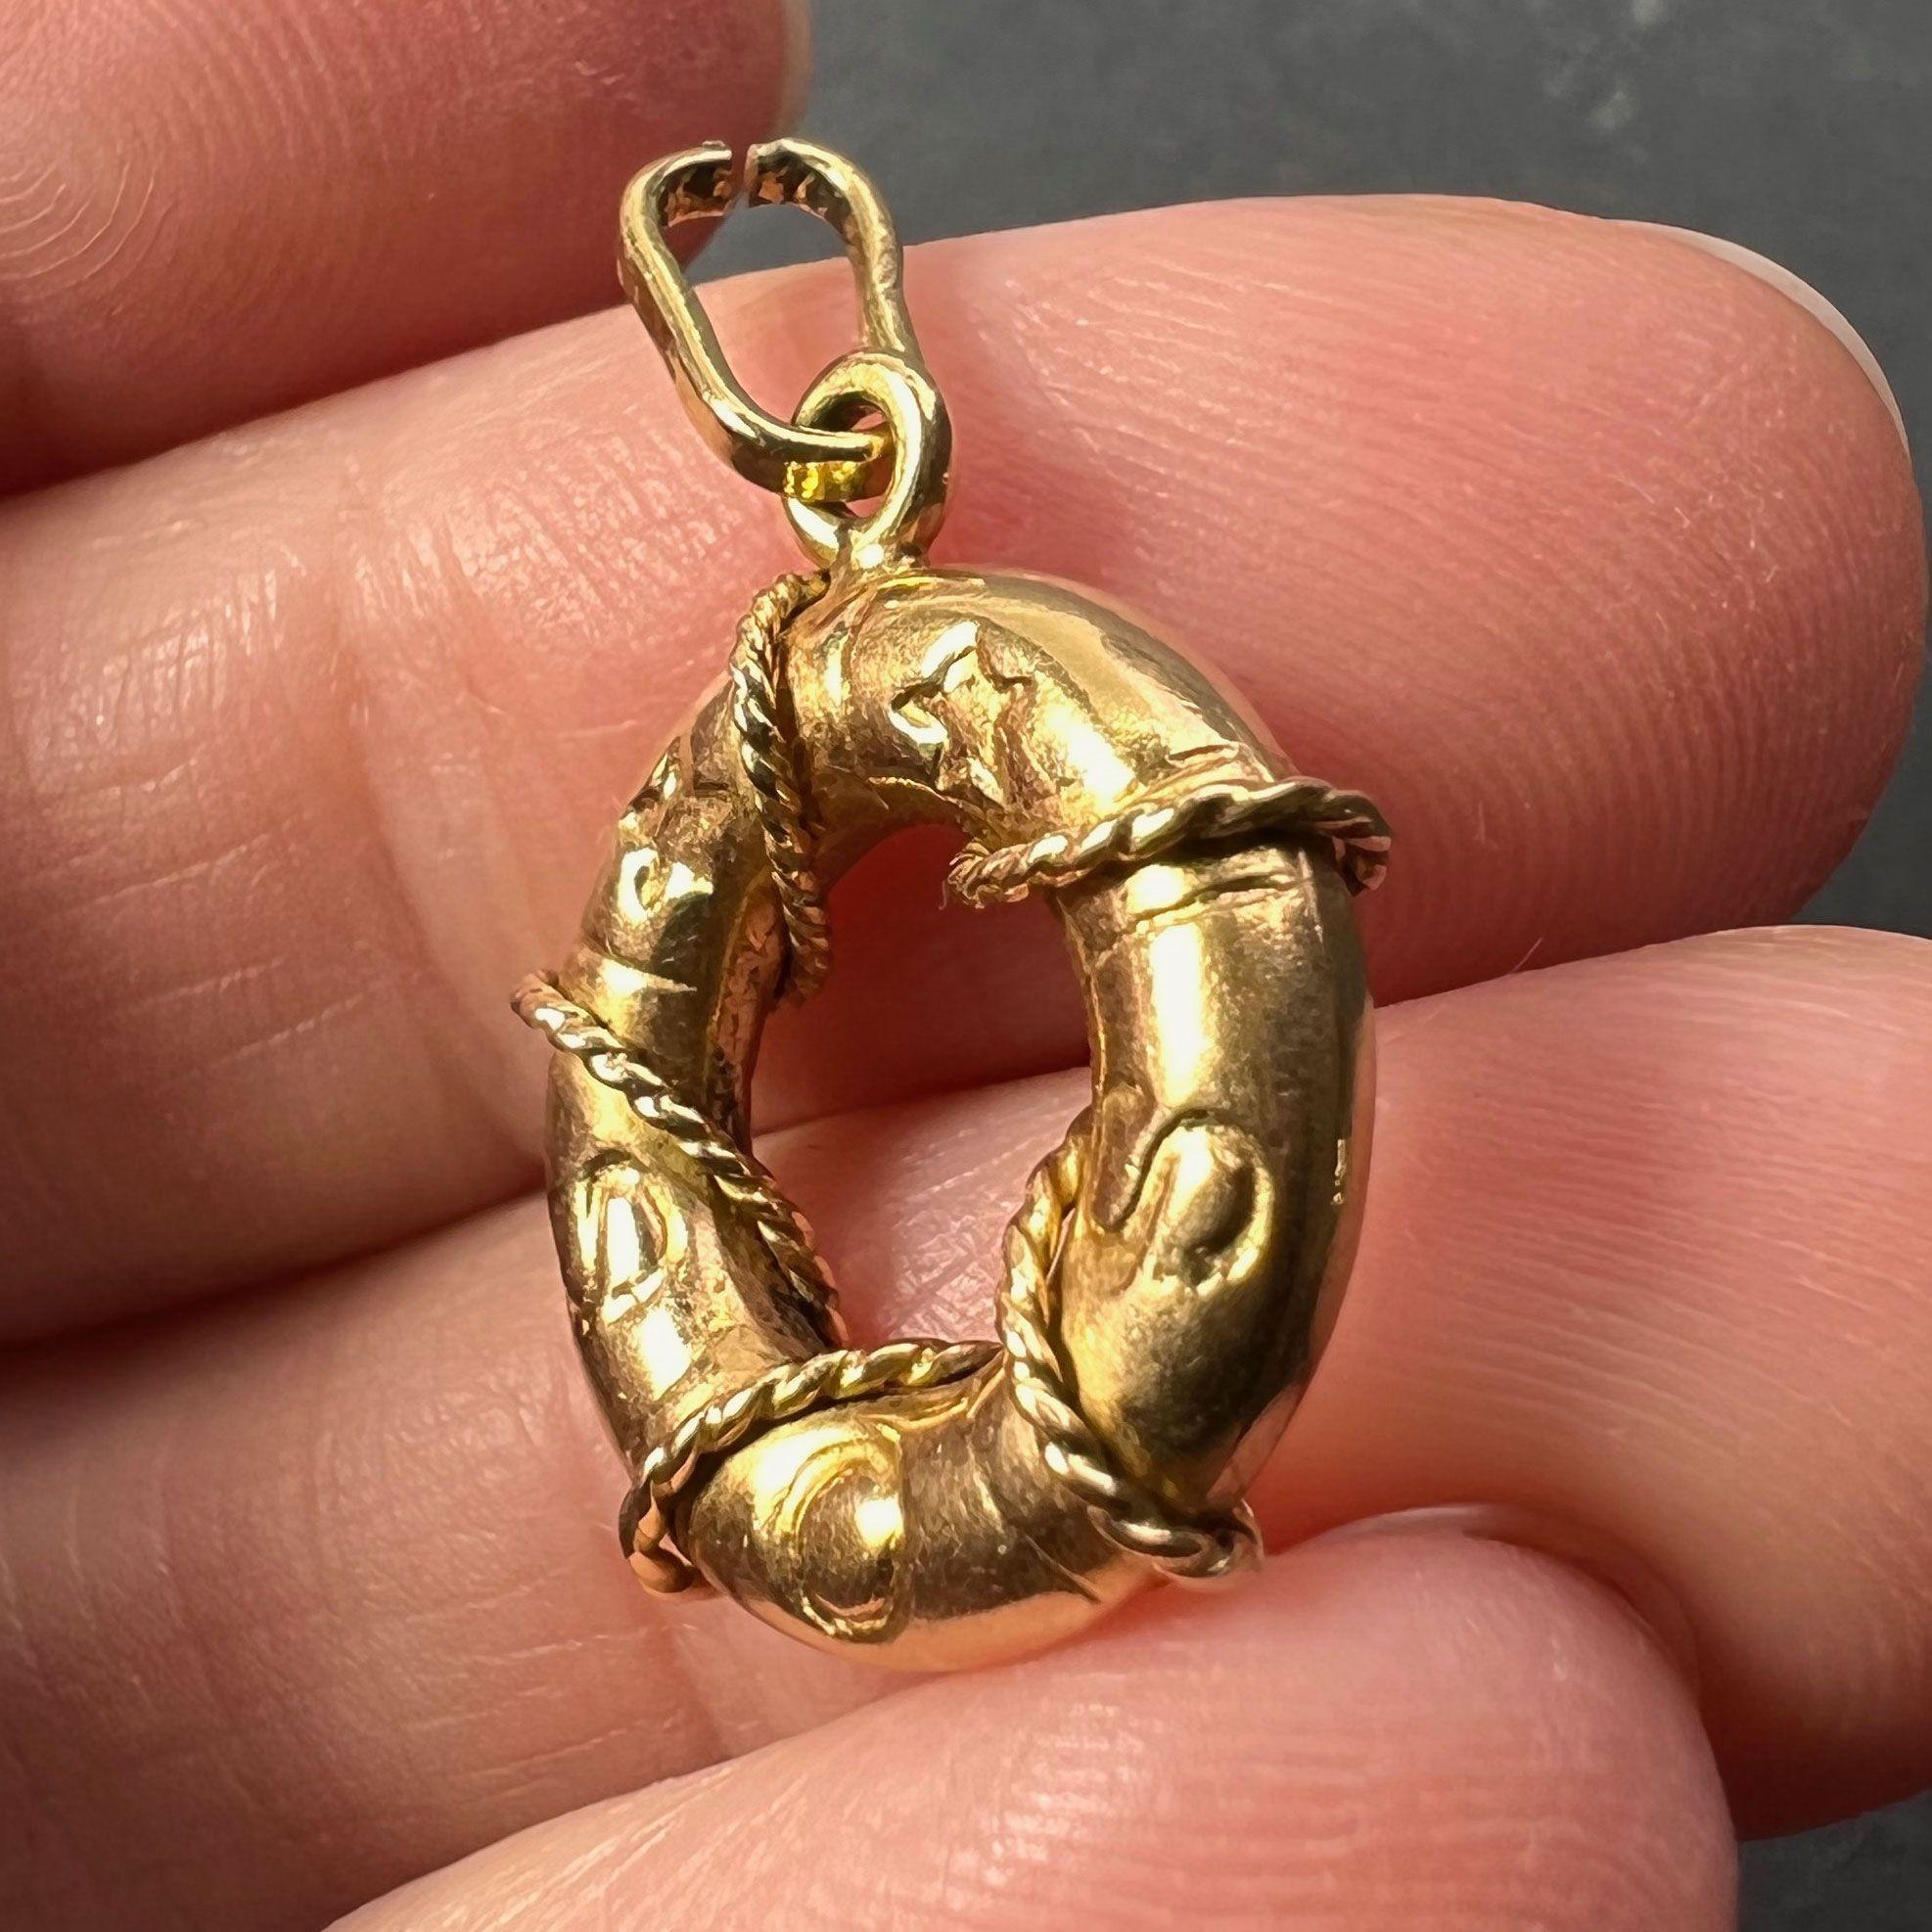 SOS Life Preserver 18K Yellow Gold Charm Pendant In Good Condition For Sale In London, GB